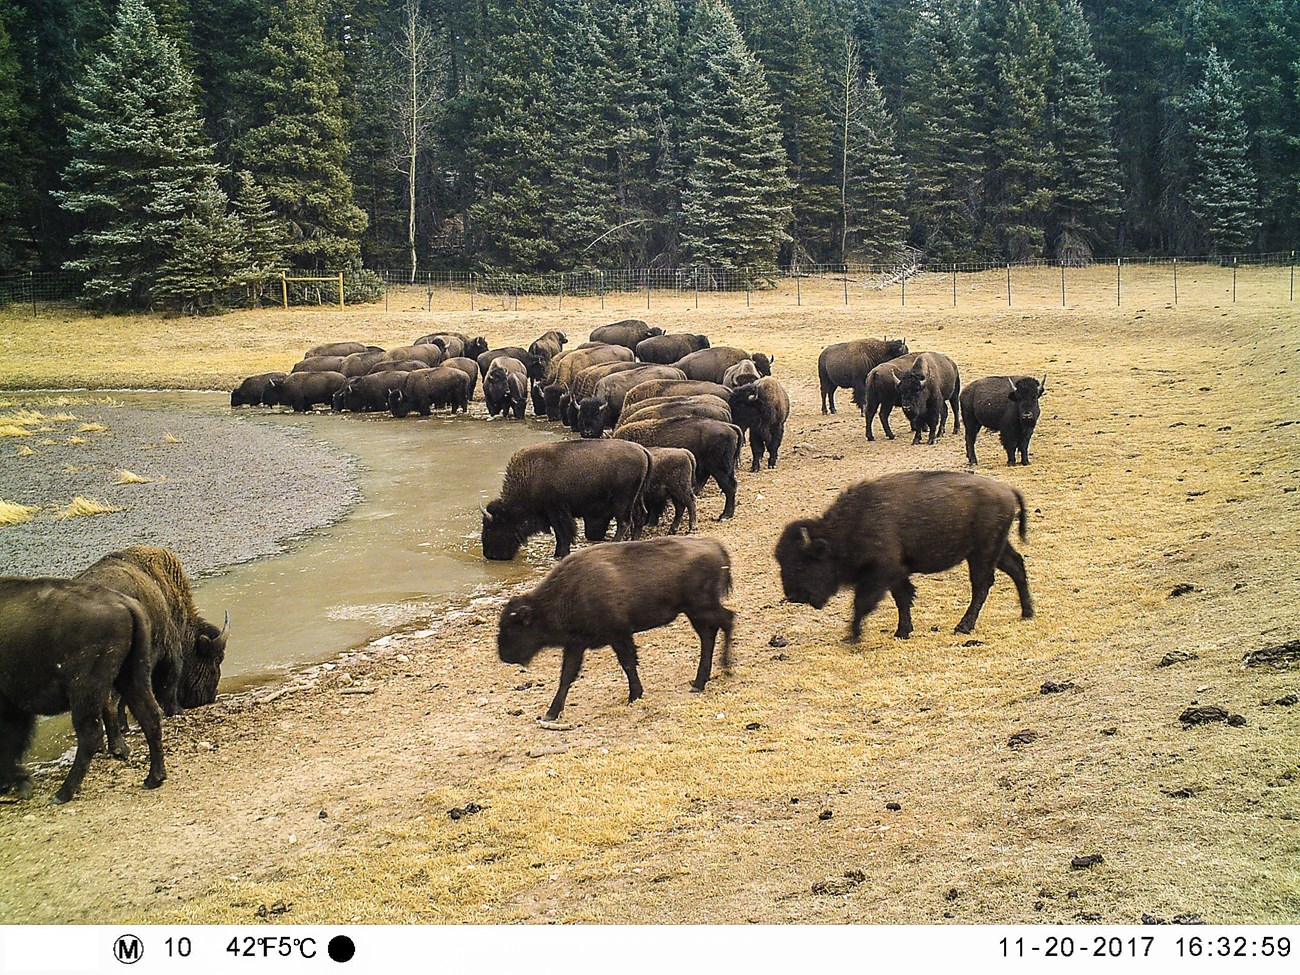 A herd of thirty bison stand in water source. The edge of the water is muddied and compact while the surrounding grass is trampled and littered with bison feces.